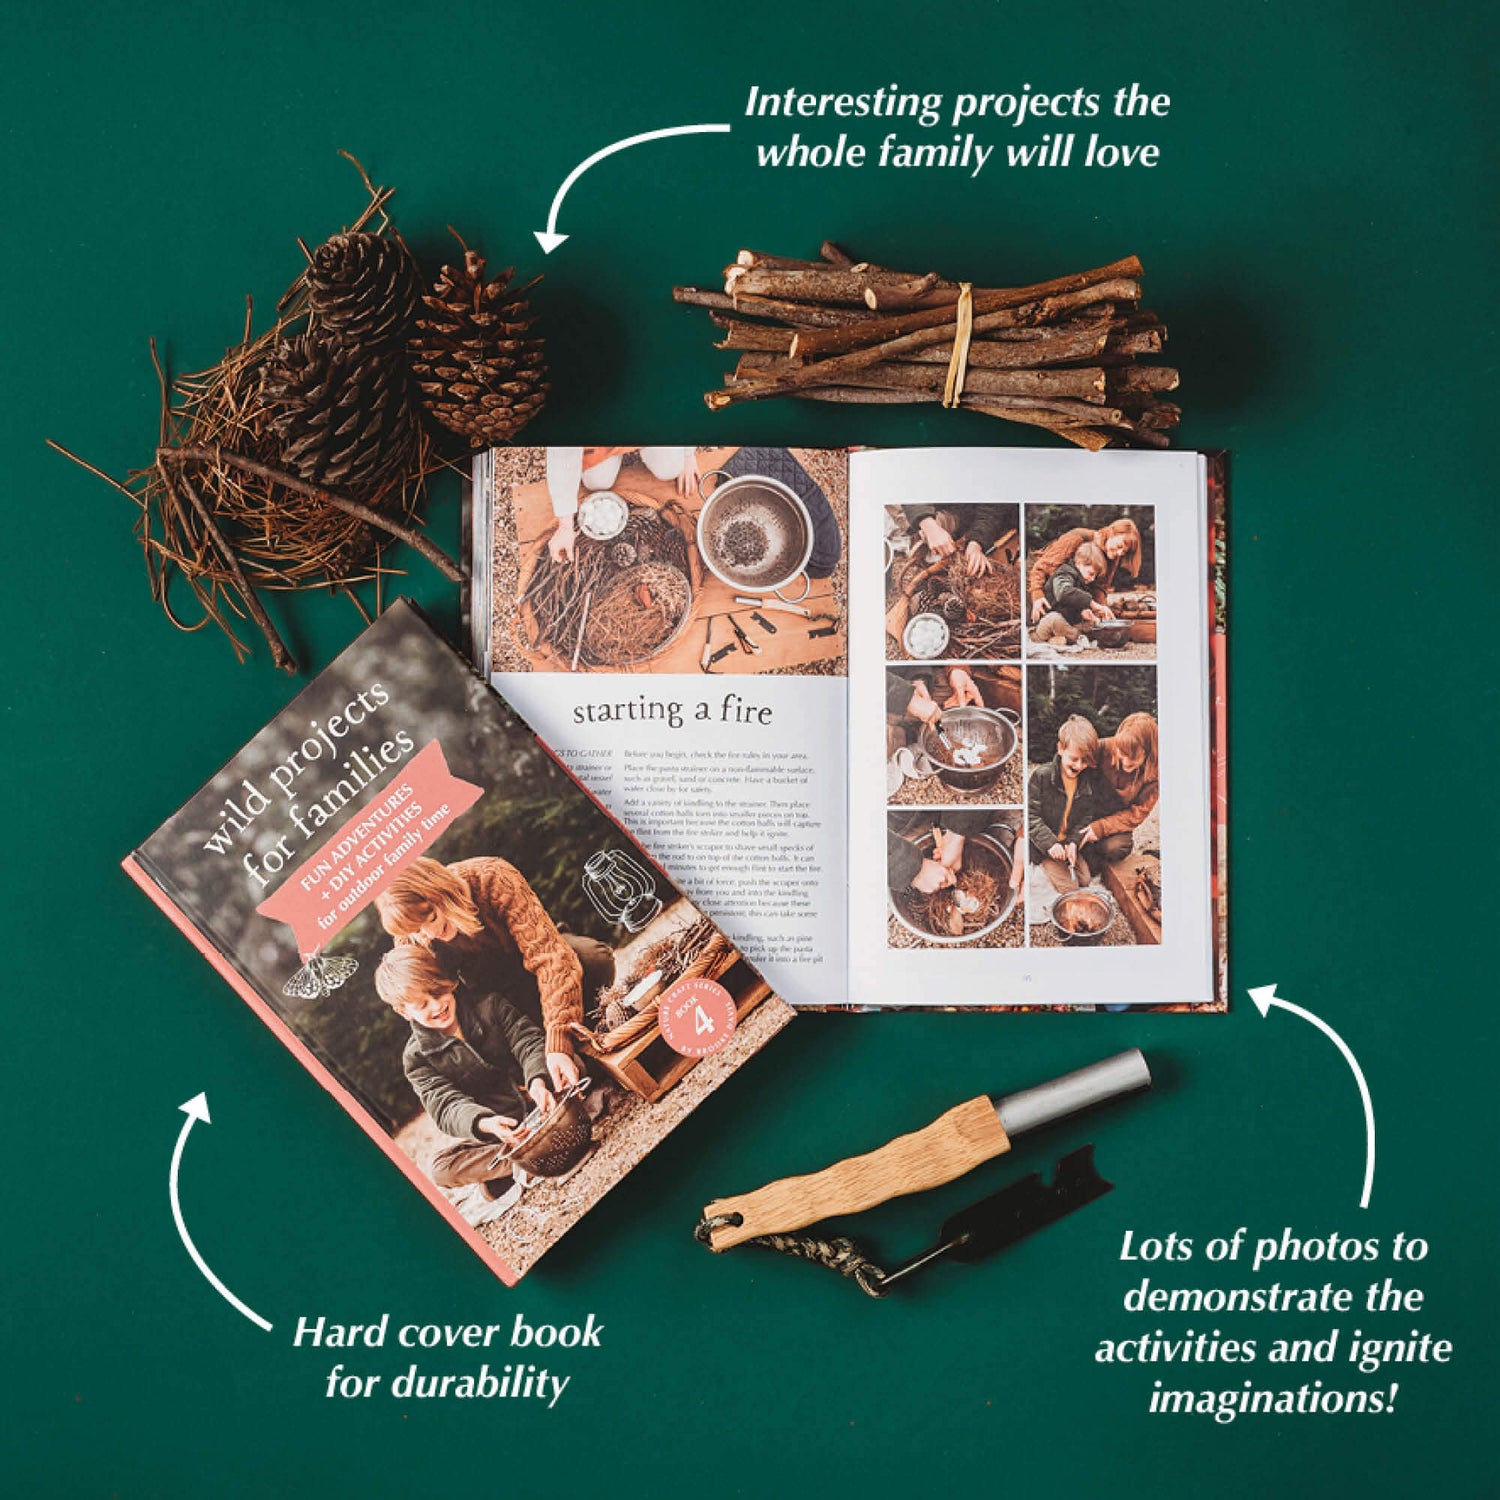 Pages about starting a fire from Real Tools Bundle by Your Wild Books includes Wild Projects for Families book, whittling knife, hand drill and fire starter.